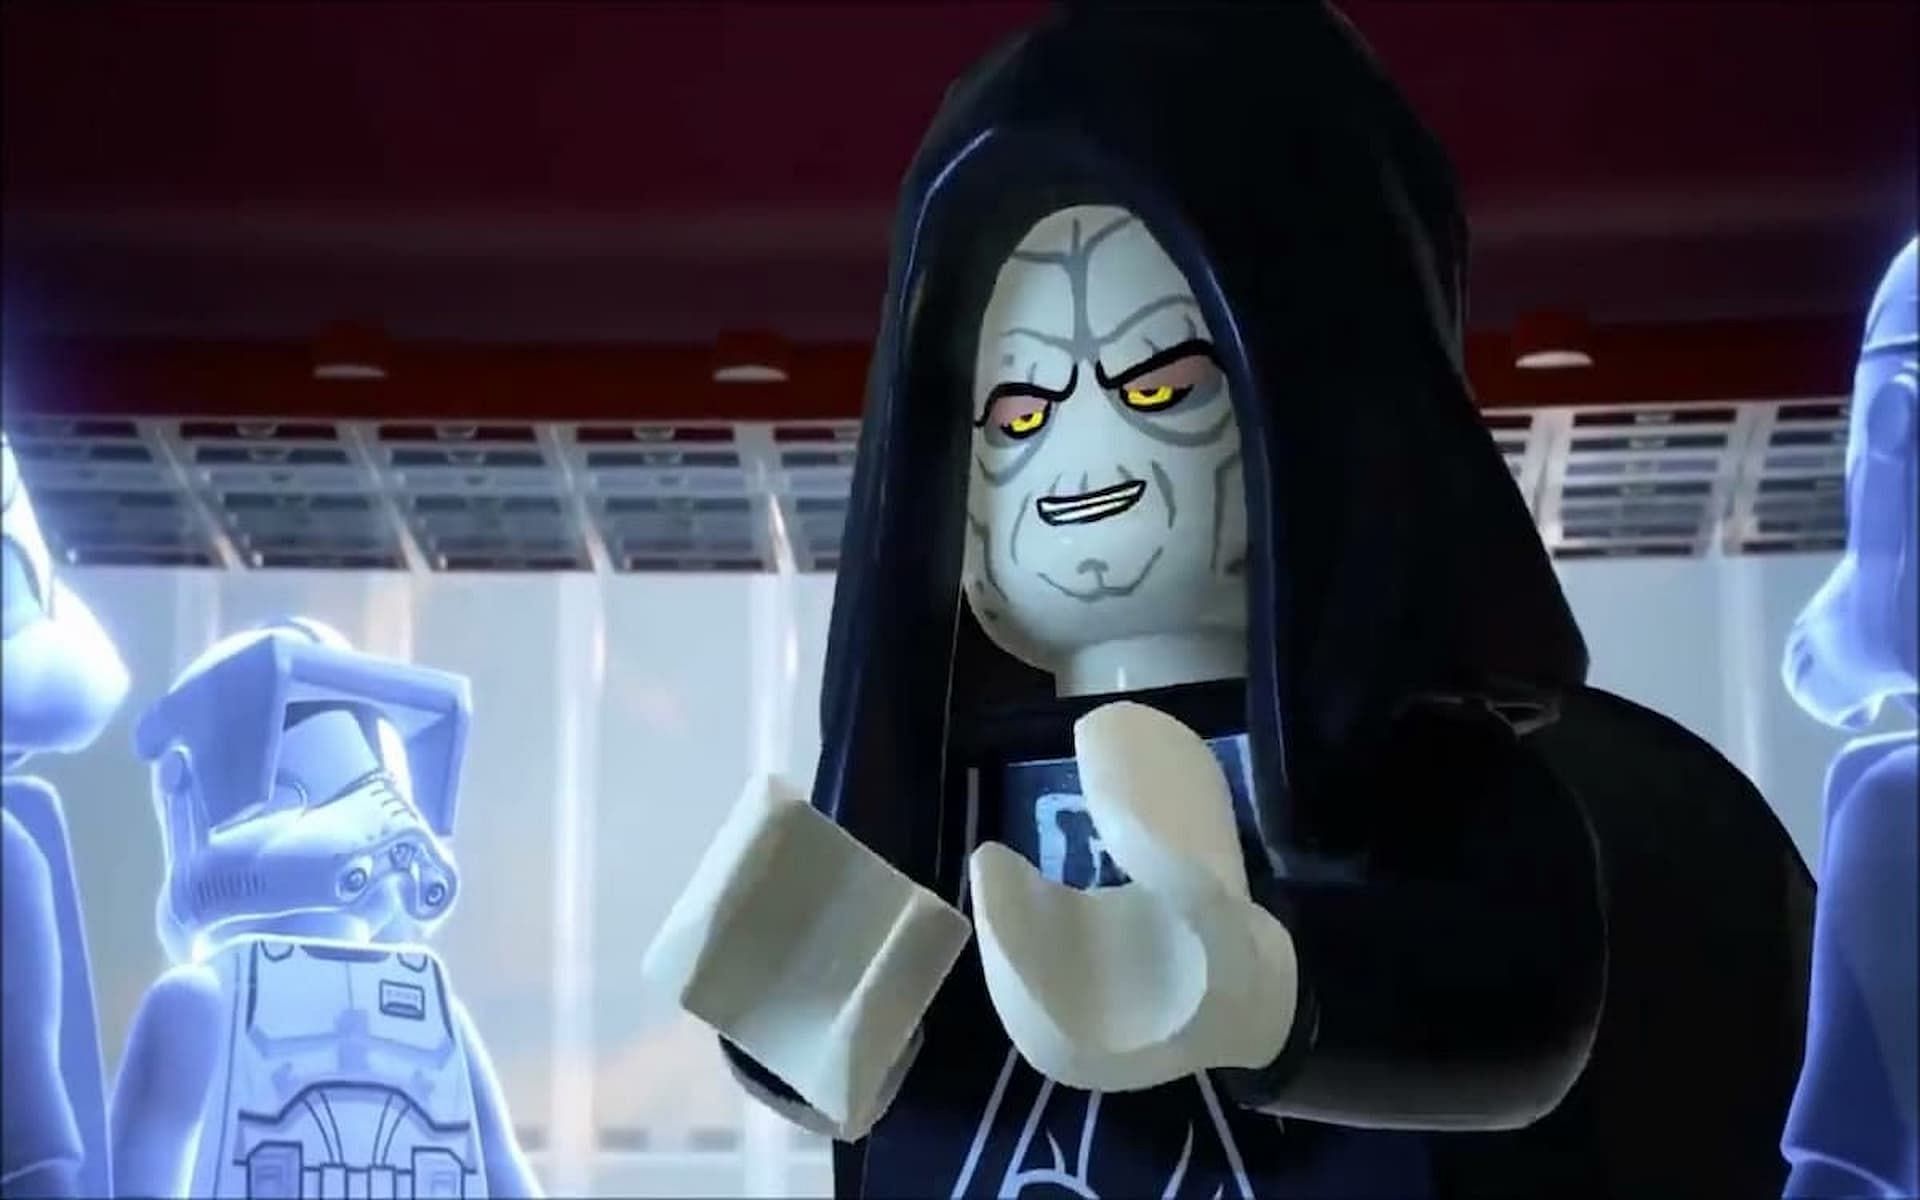 Palpatine memorably refers to himself as &quot;The Senate&quot; (Image via TT Games)